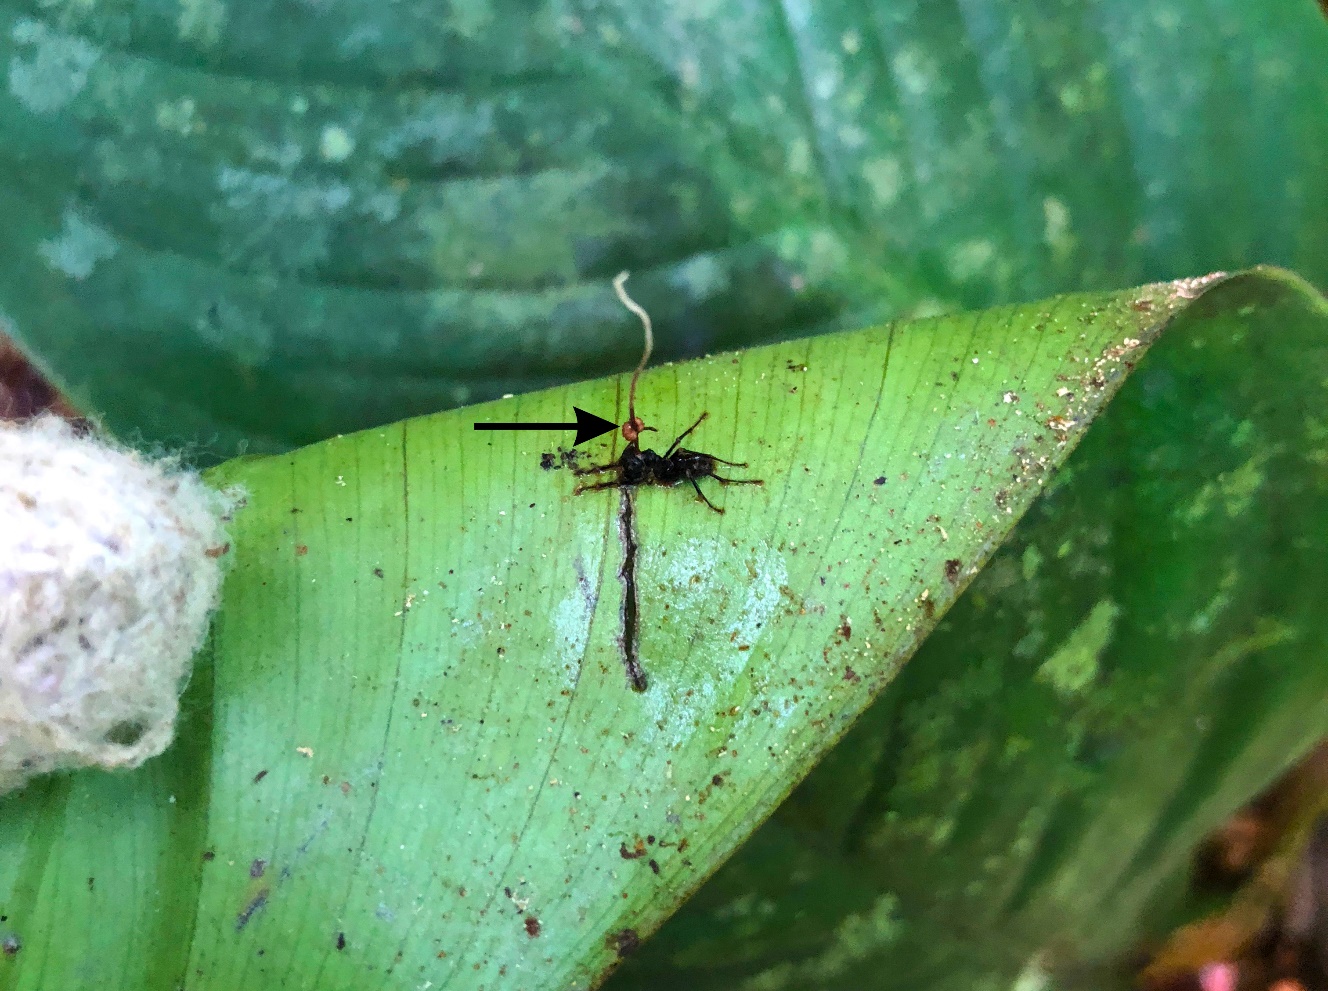 Figure 1: Photograph of Camponotus leonardi infected with Ophiocordyceps unilateralis, securely attached to the underside of a leaf. The fungus can be seen emerging from the dorsal region of the ant’s head. The arrow indicates the perithecial plate, which sits upon the stroma of the fungus and releases spores, spreading infection. Image from the author’s own collection